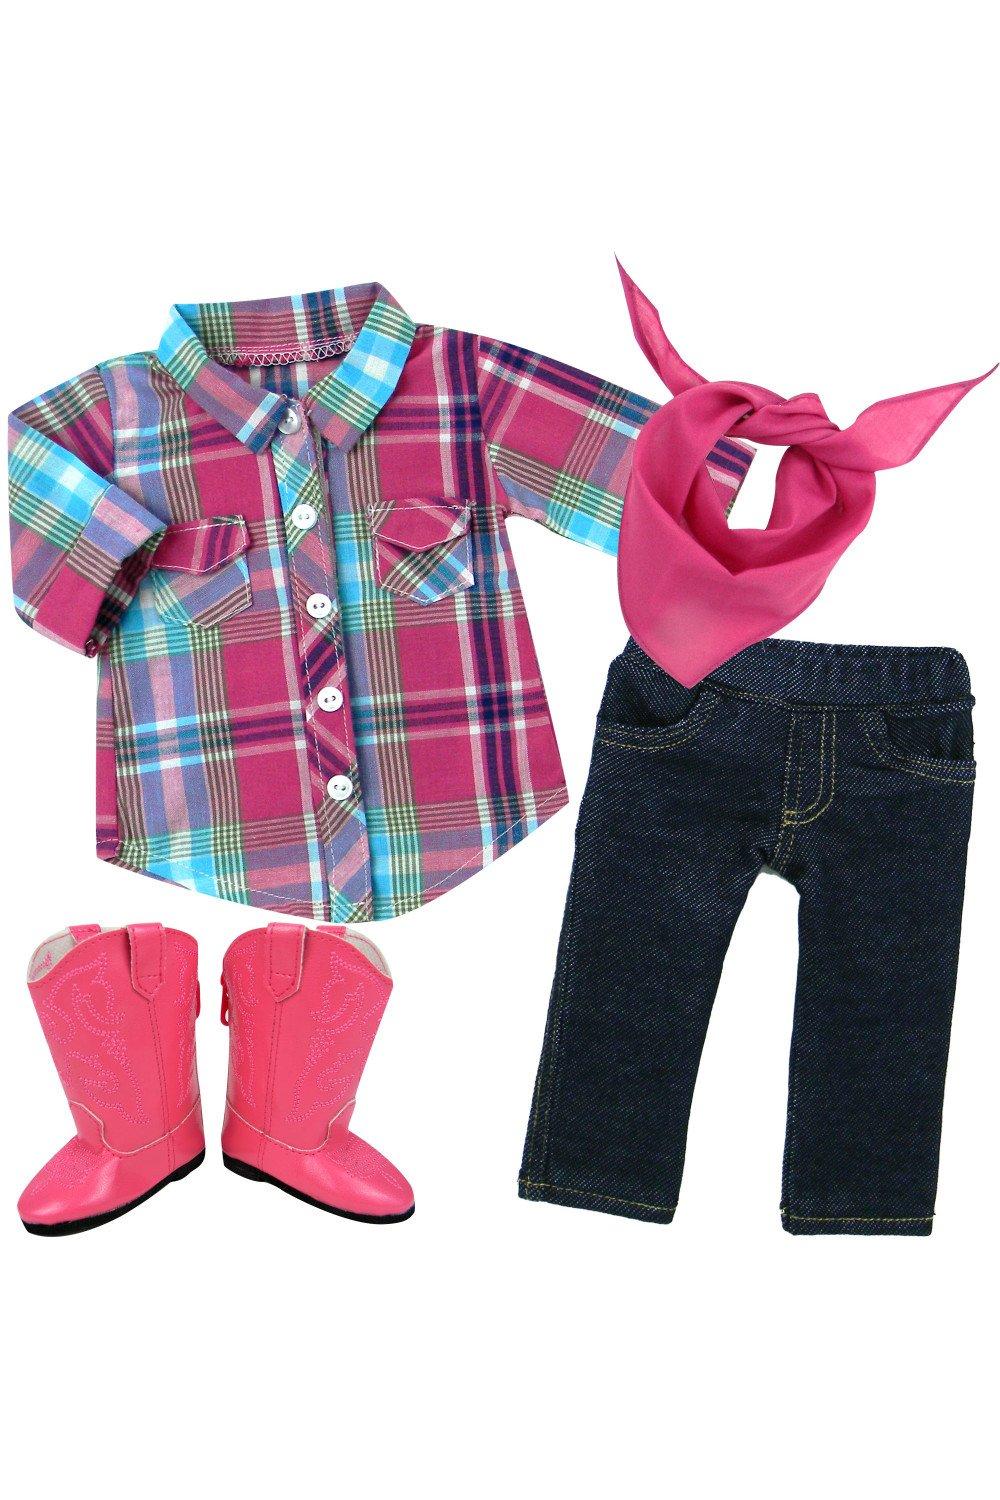 Sophia’s  18" Doll Pink Checked Shirt & Jeggings with Bandana & Boots